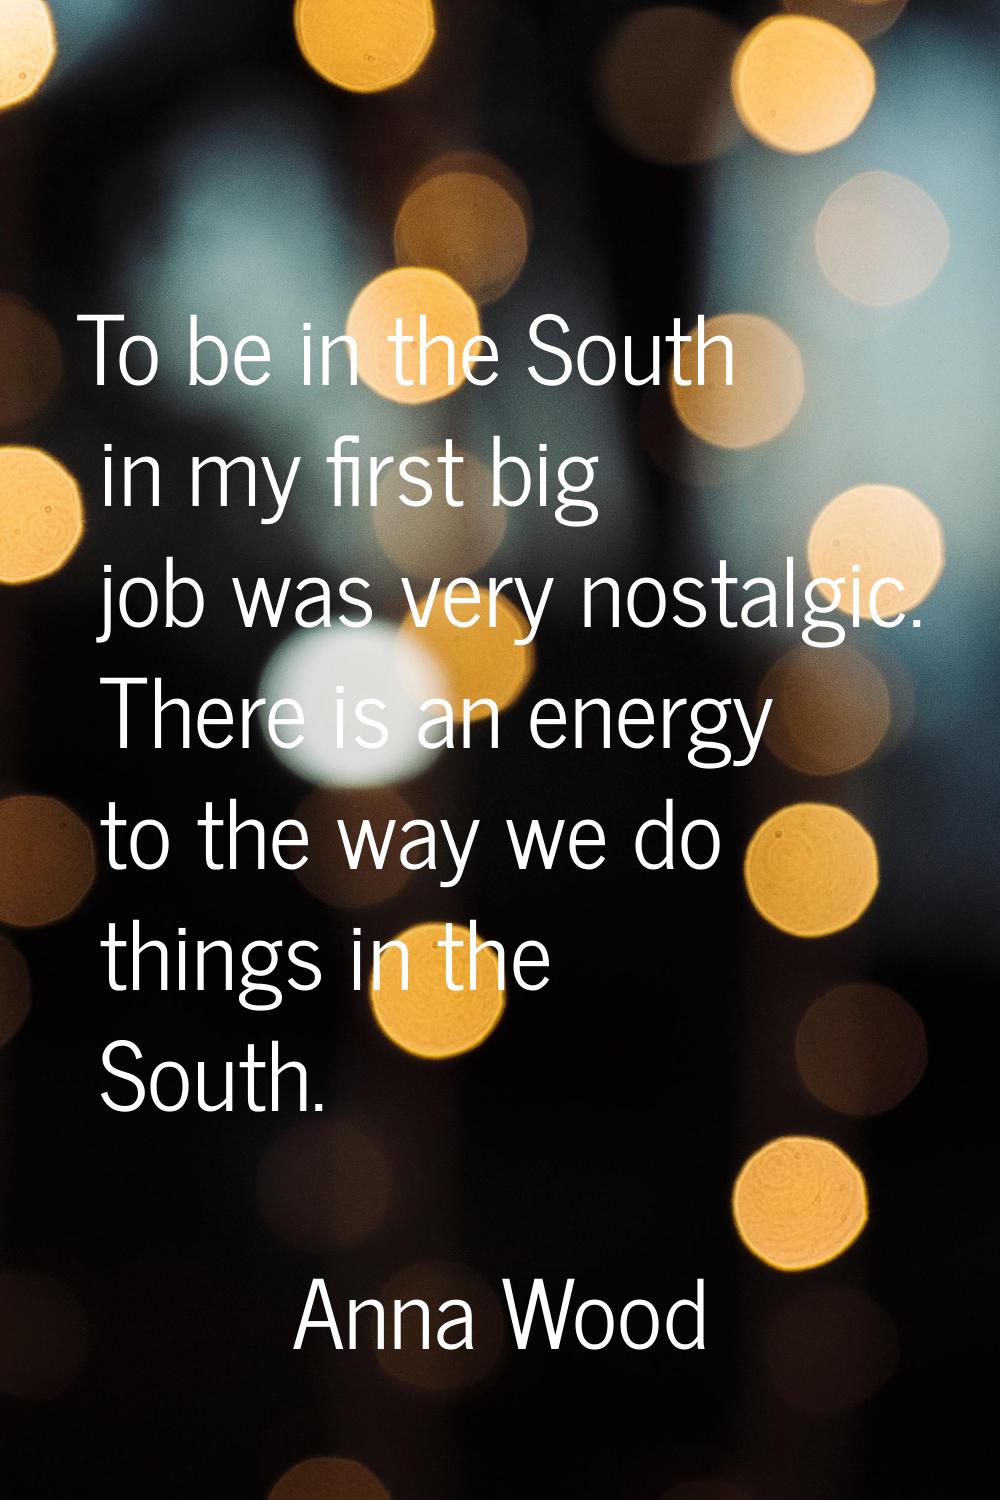 To be in the South in my first big job was very nostalgic. There is an energy to the way we do thin